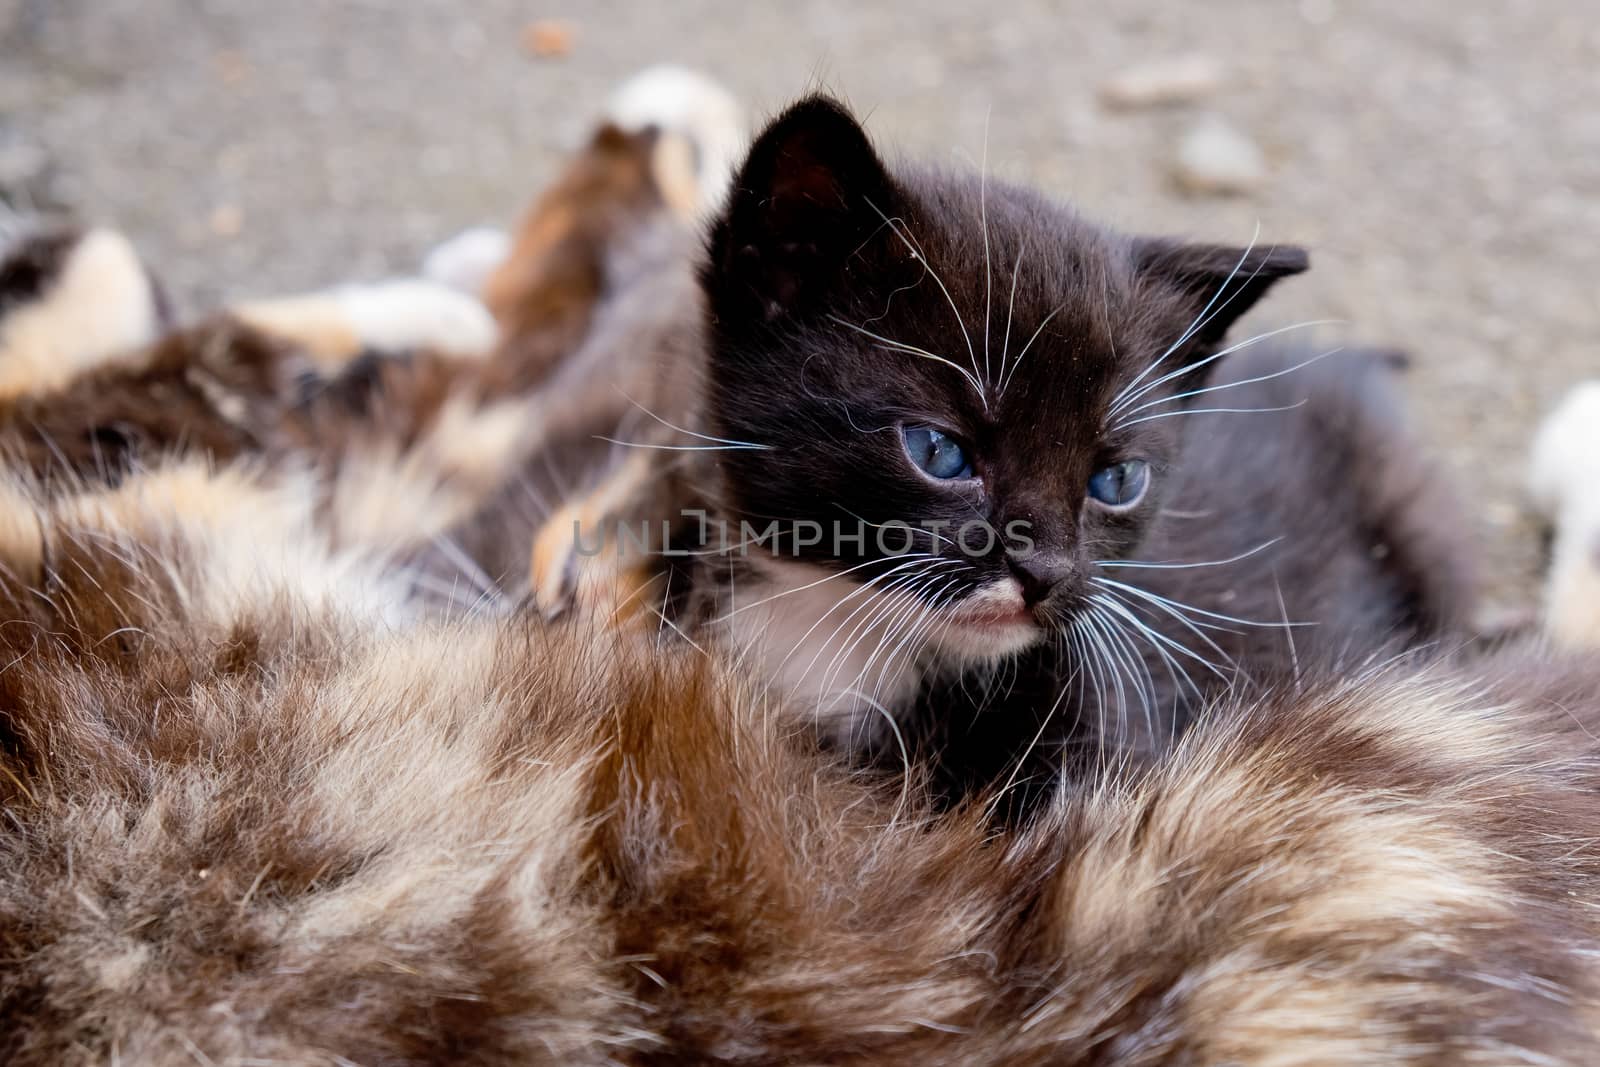 Small black kitten with blue eyes in outdoors.